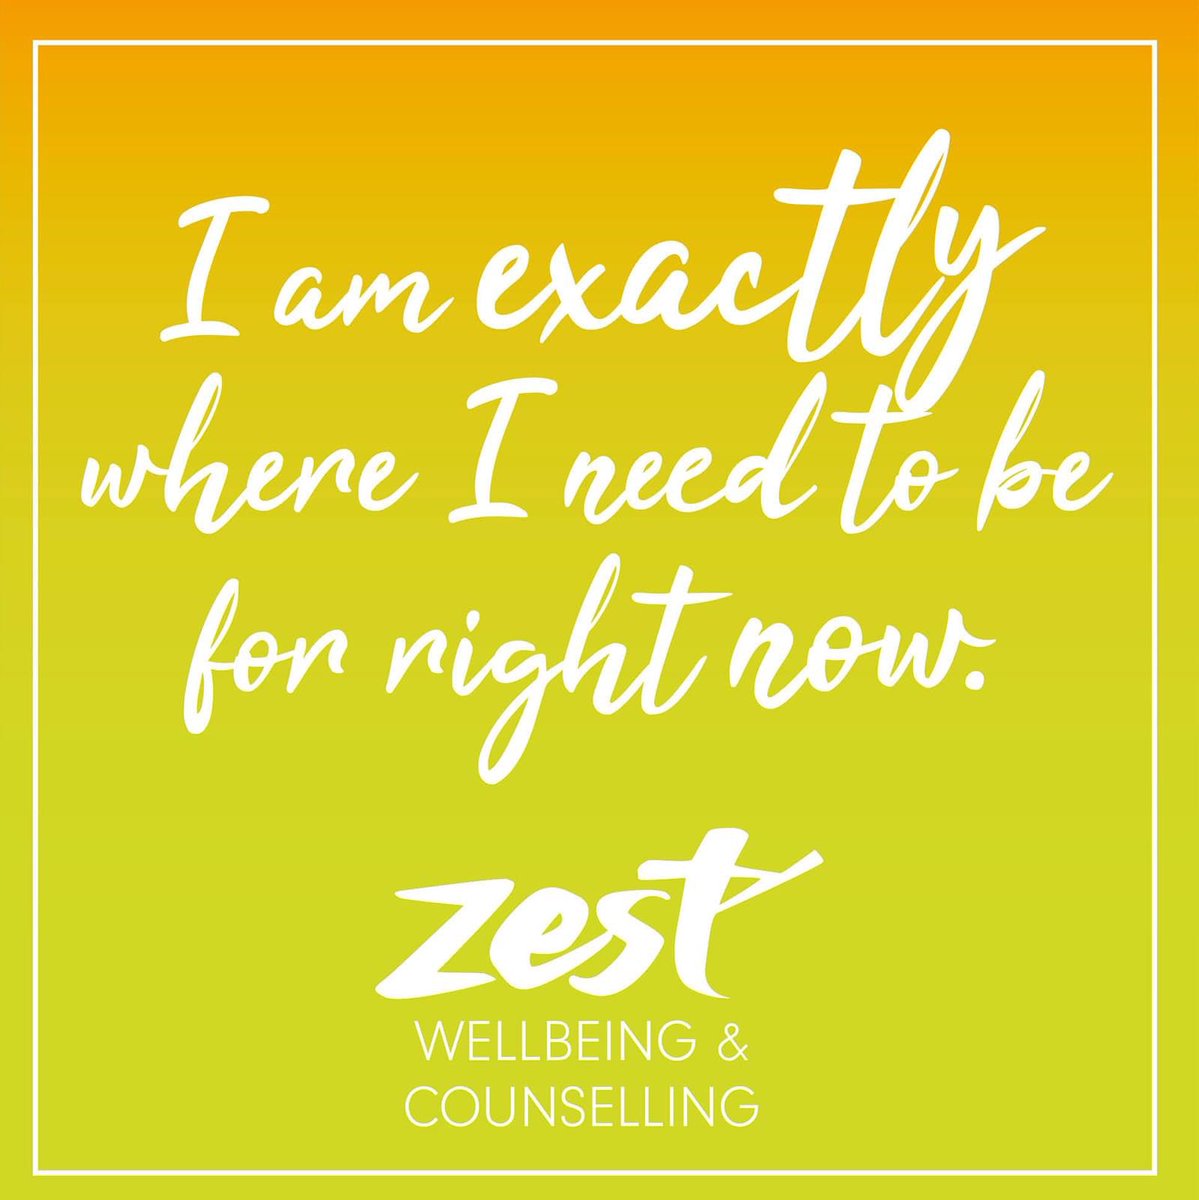 Sometimes we need reminding with positive affirmations. It’s helpful to pause and think about what they actually mean before scrolling on.
Counselling can help you find positive change & move forwards.
zestwellbeing.co.uk
#counsellor #norwich